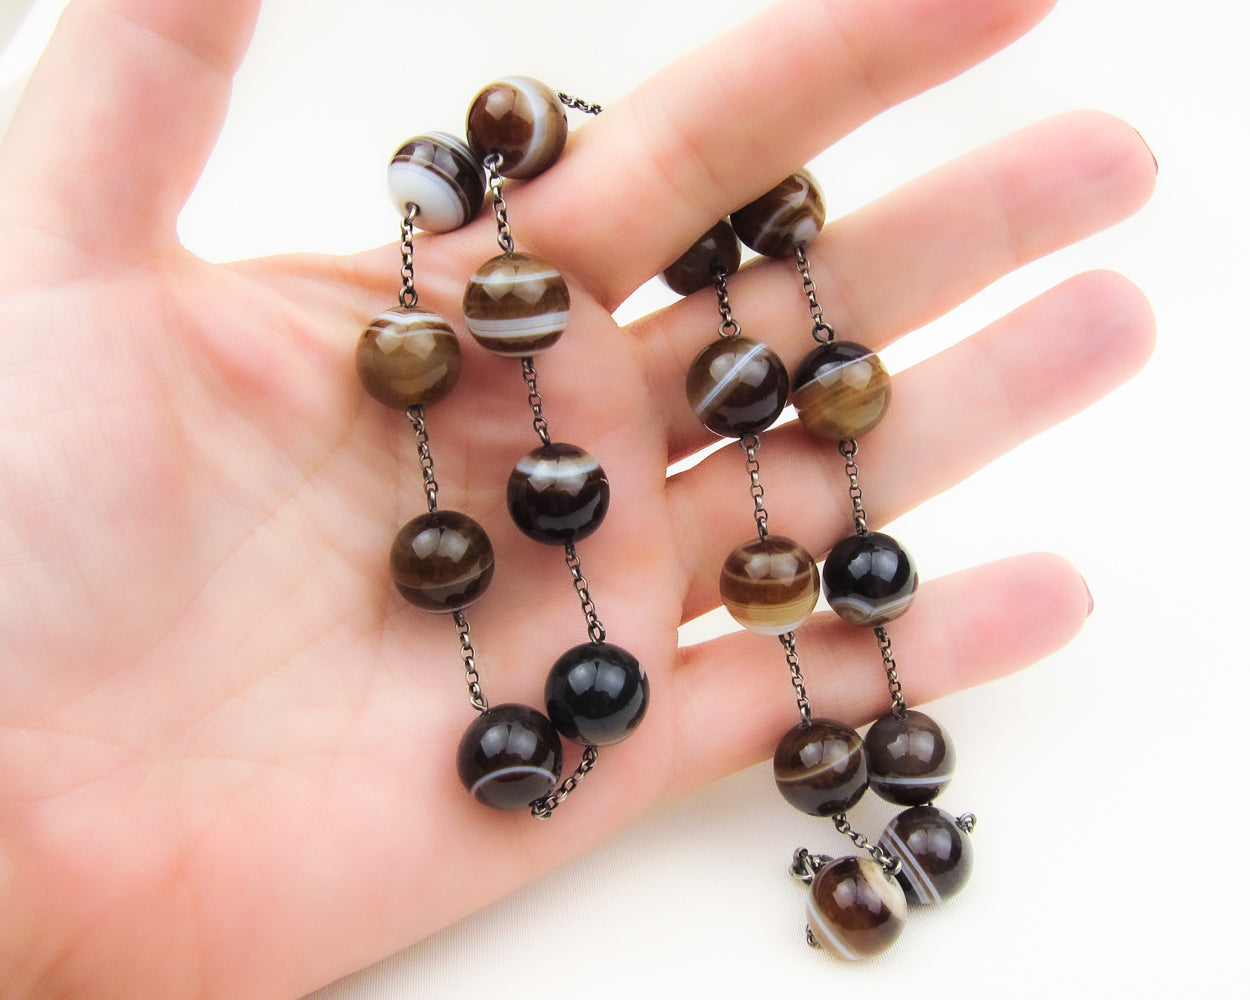 Circa 1890 Banded Agate Necklace